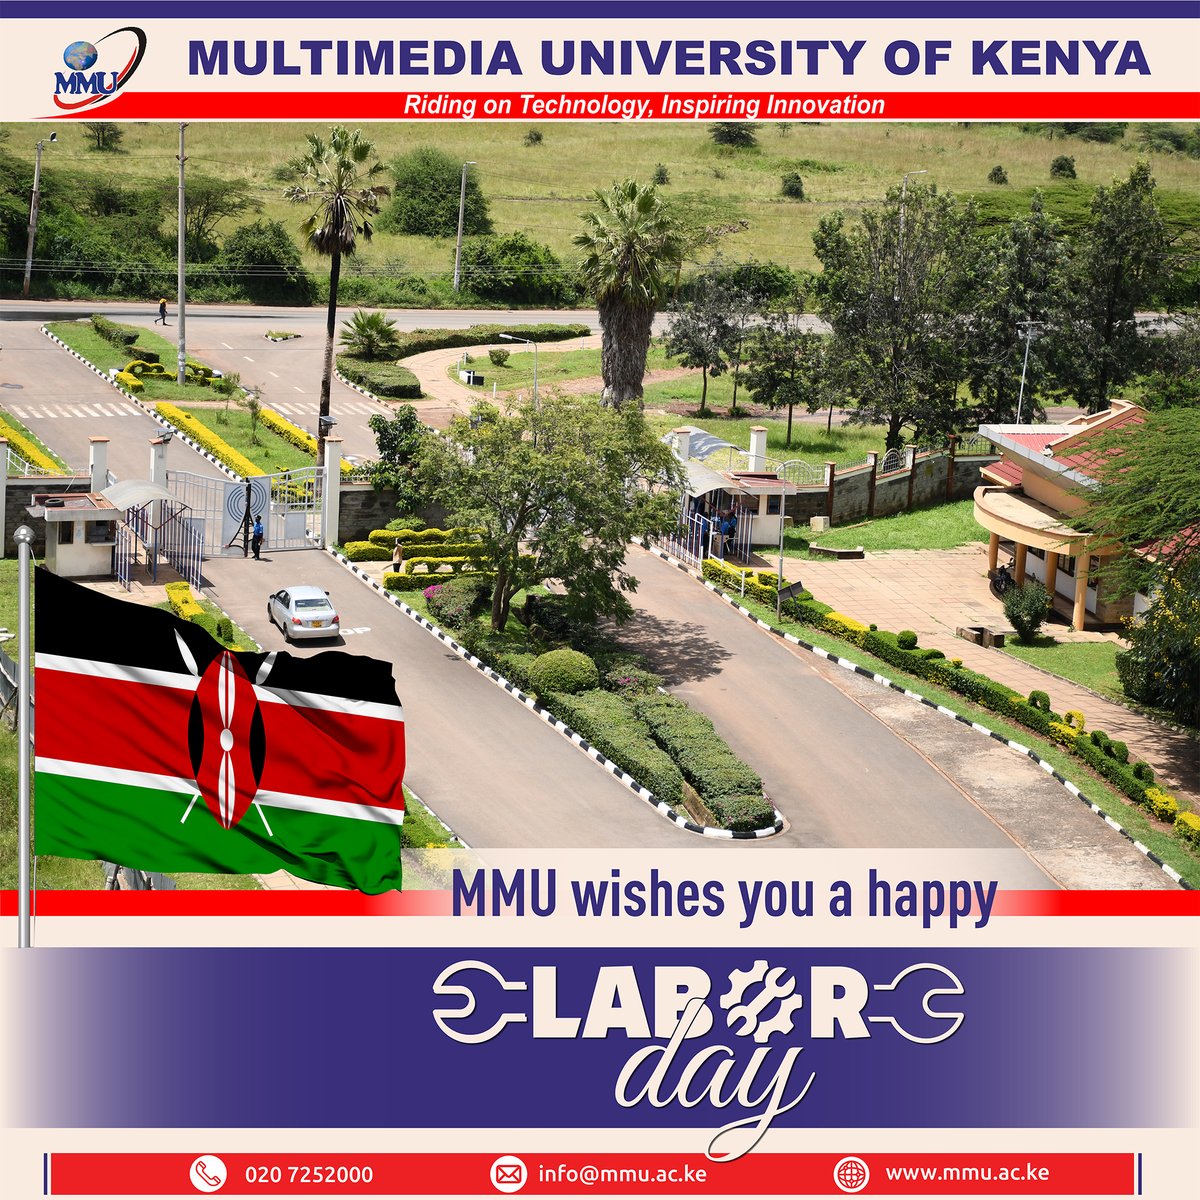 To all our stakeholders, MMU wishes you a happy Labour Day. We remain closed to day but our May and September intakes are on going. Visit our website mmu.ac.ke for more. Remember to stay safe during this rainy season. Happy Labour Day!